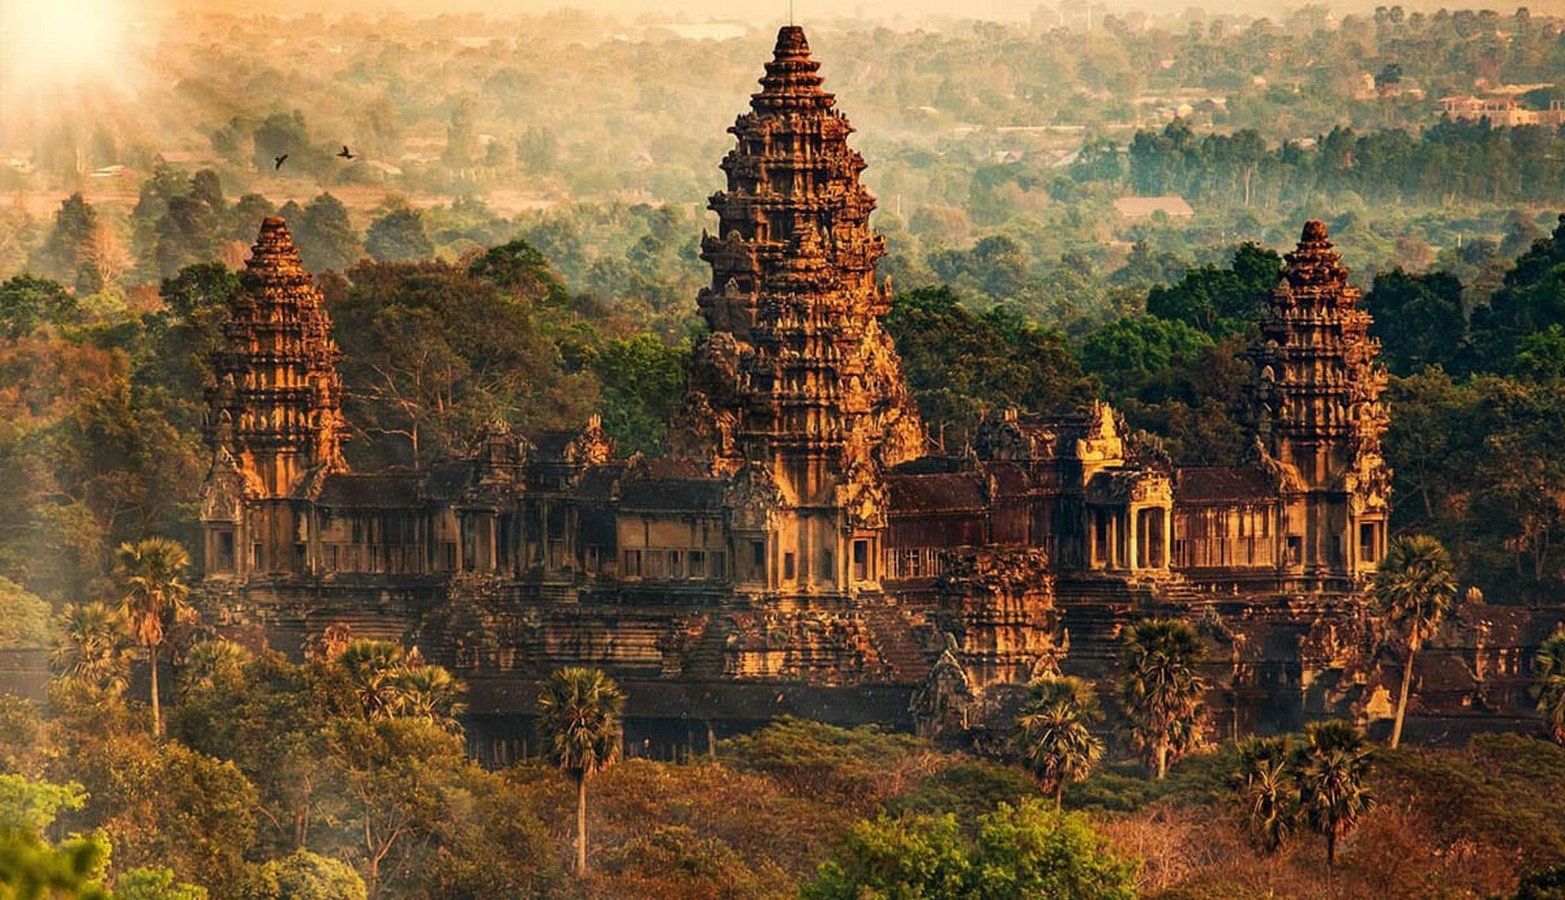 <span style="font-weight: 400;">A structure that paints an incredible Cambodian history _©Smithsonian</span>